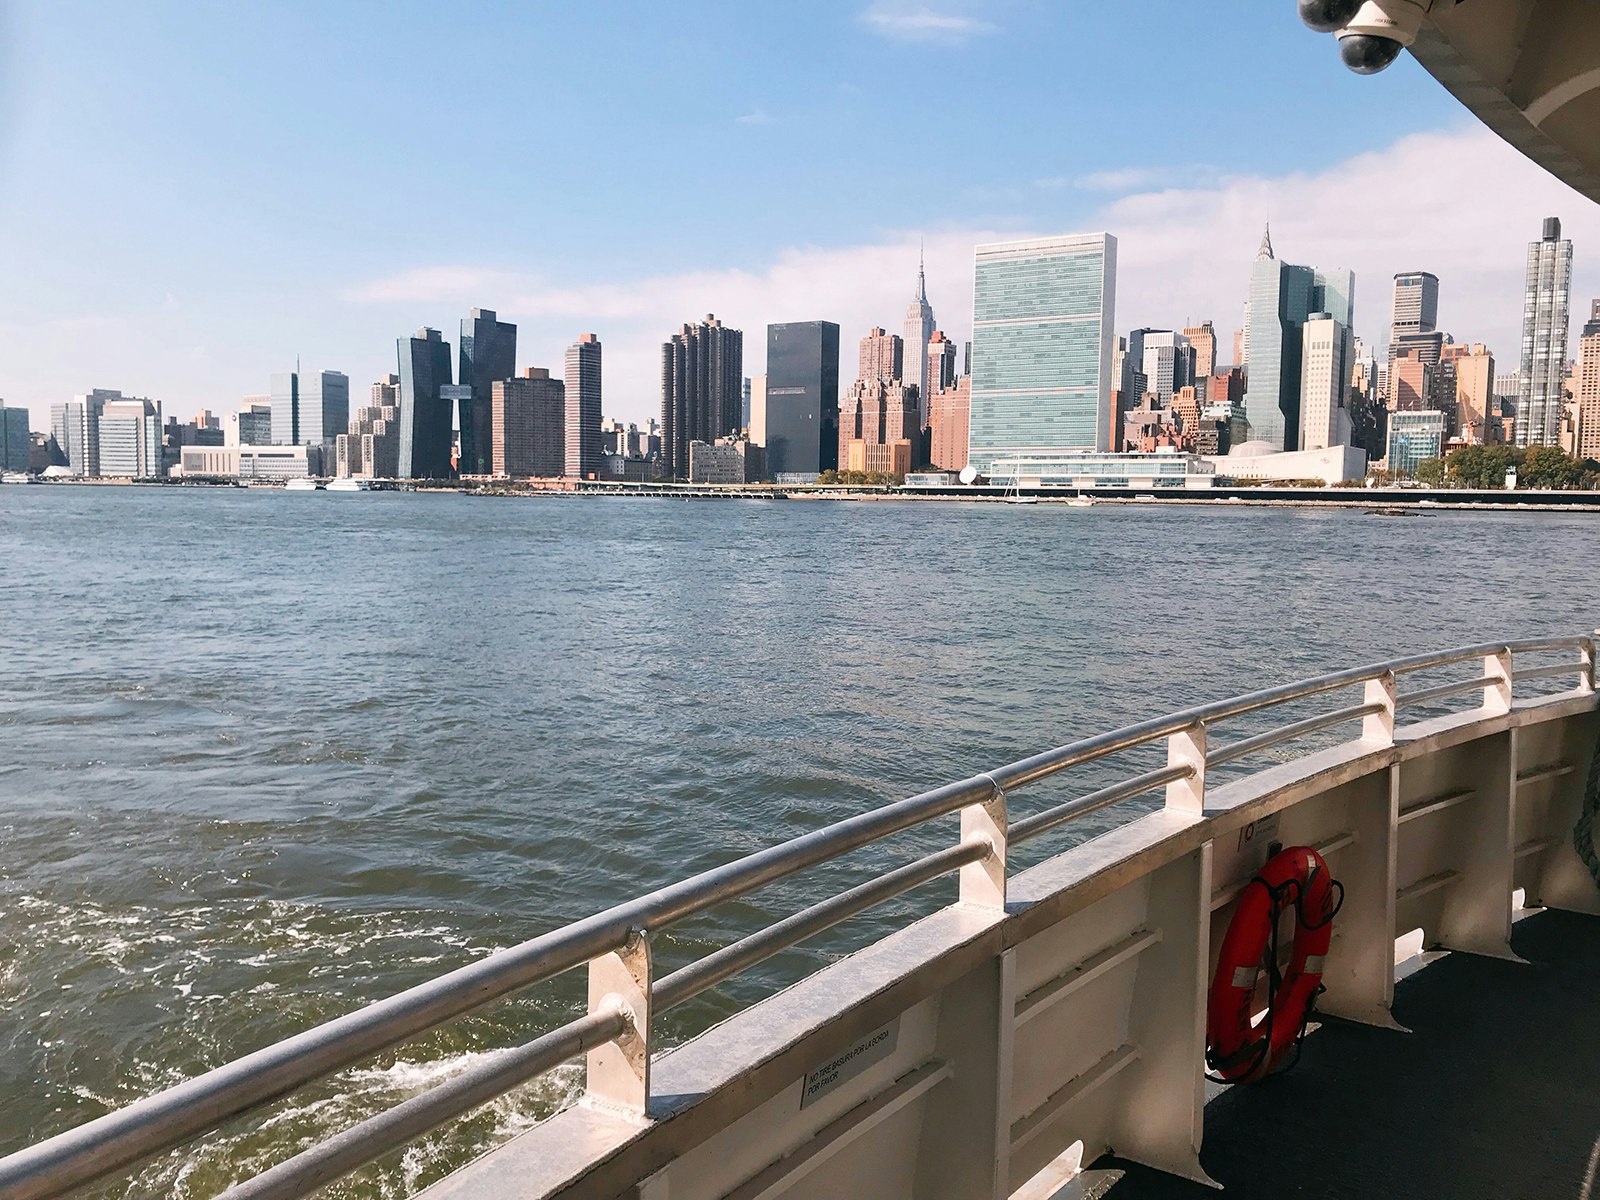 Skyscrapers in East Manhattan, as seen from the Esat River on a sunny day, over the rail of a ferry boat